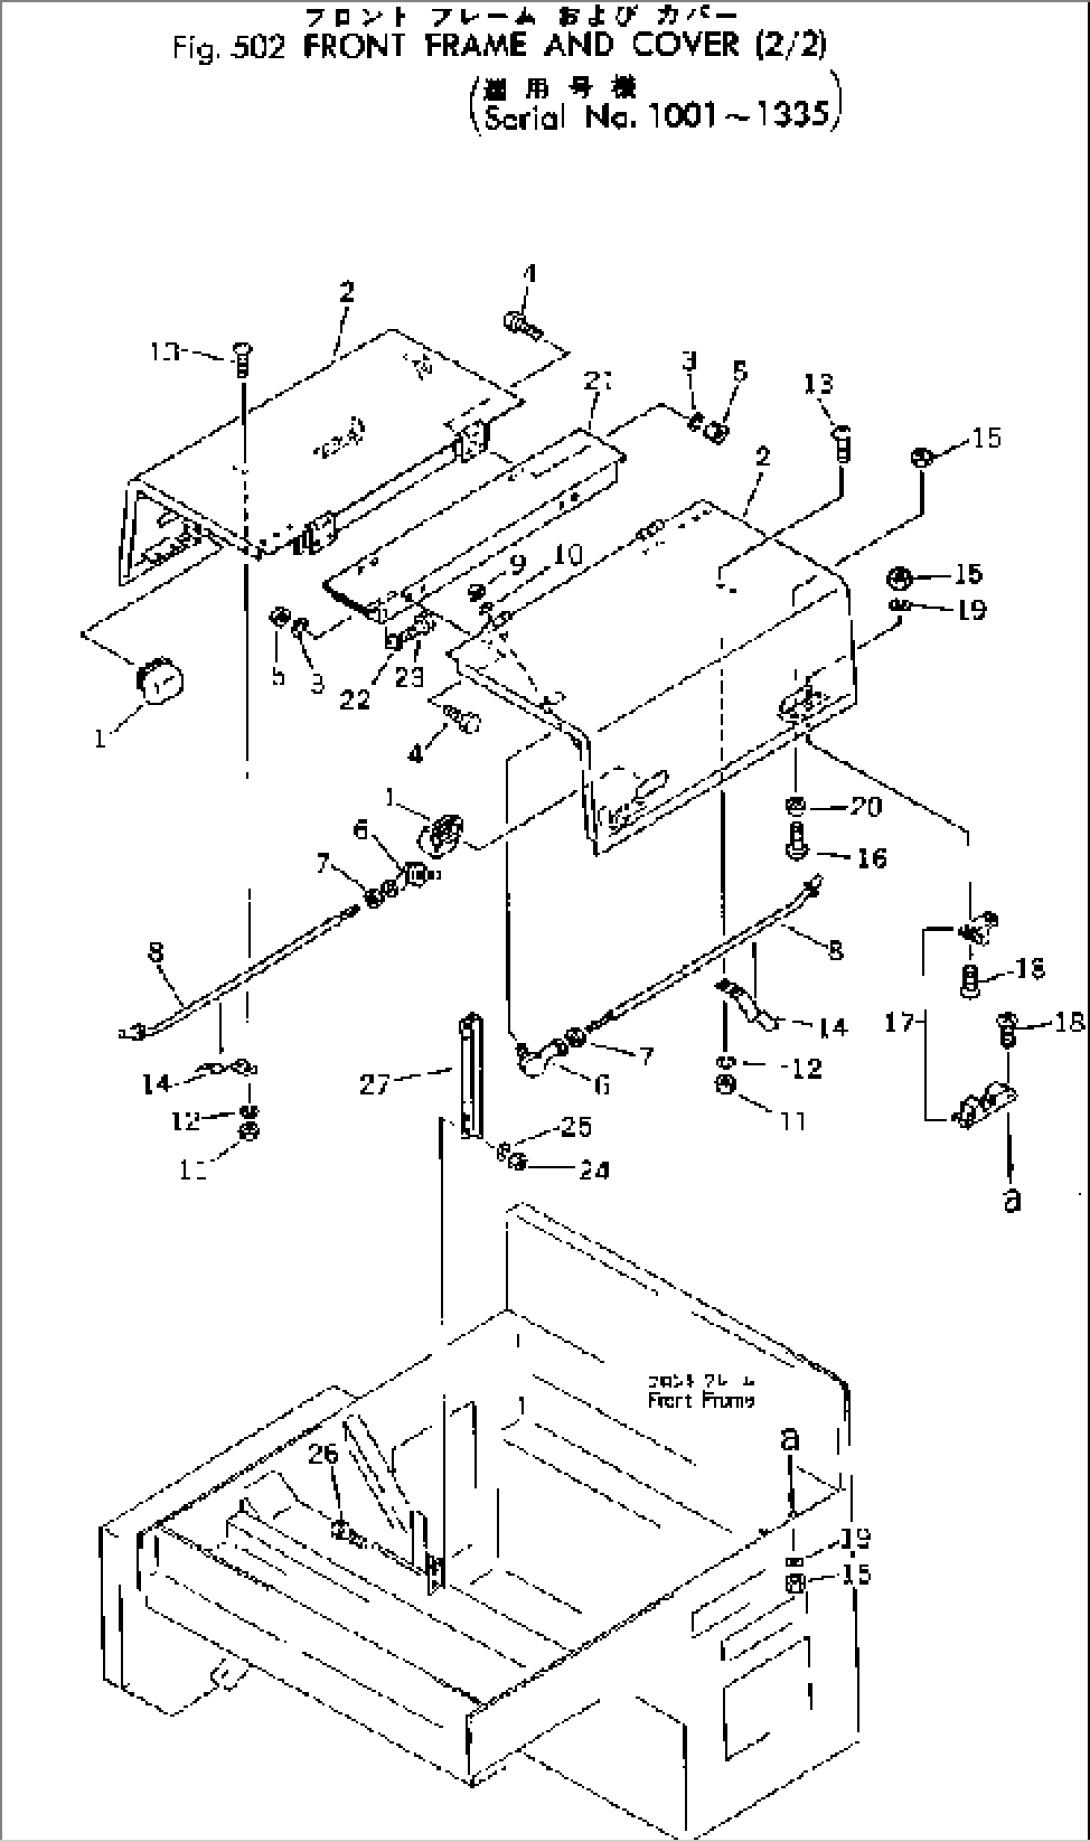 FRONT FRAME AND COVER (2/2)(#1001-1335)